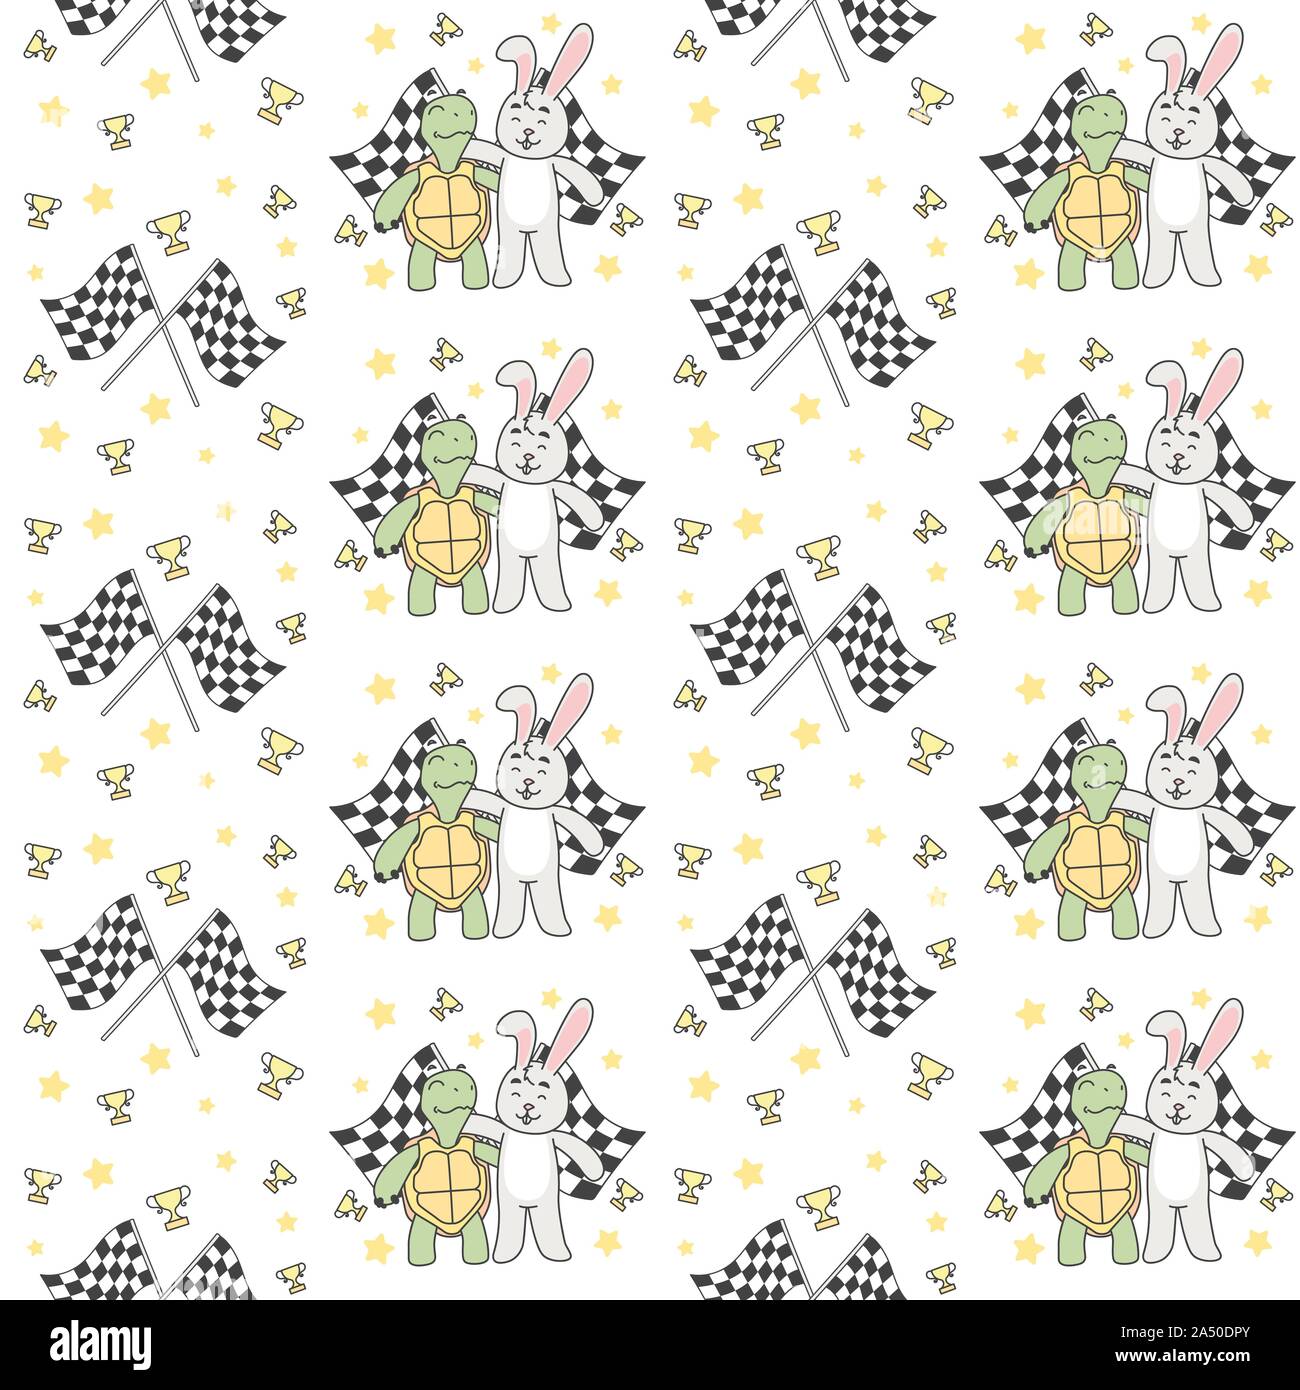 Buddy Racing. Turtle and Rabbit seamless Pattern illustration. Stock Vector